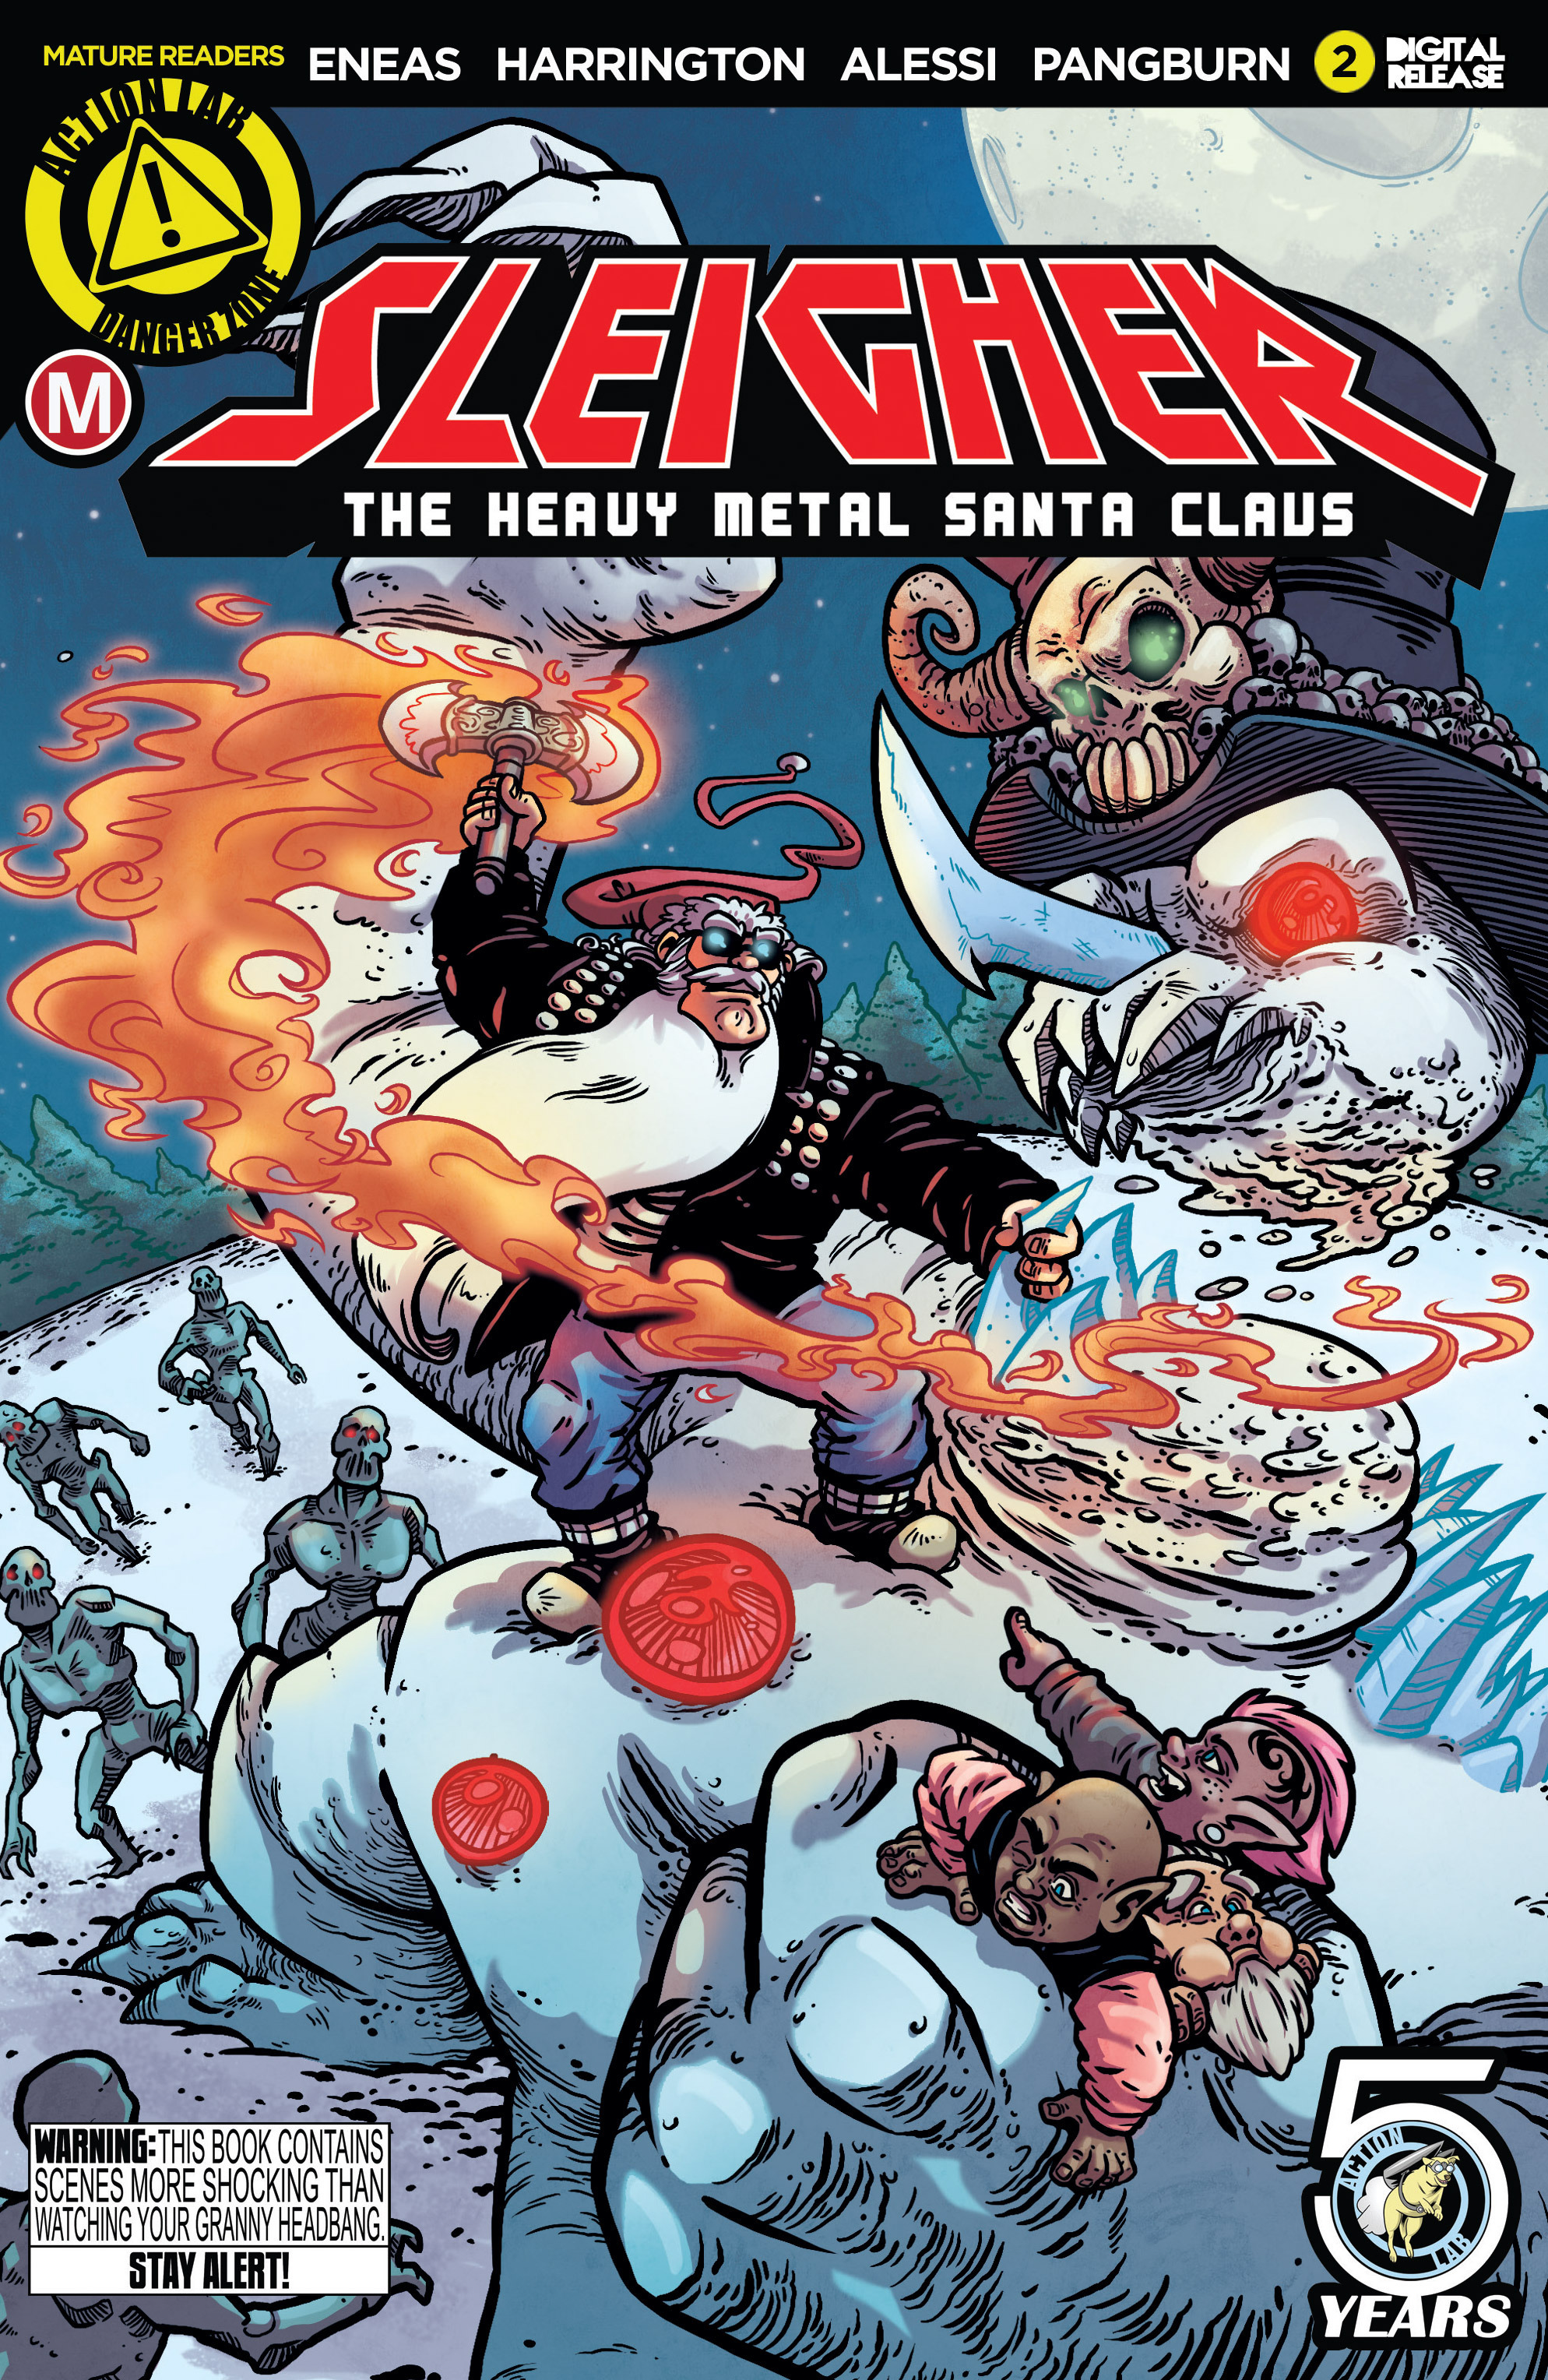 Read online Sleigher comic -  Issue #2 - 1